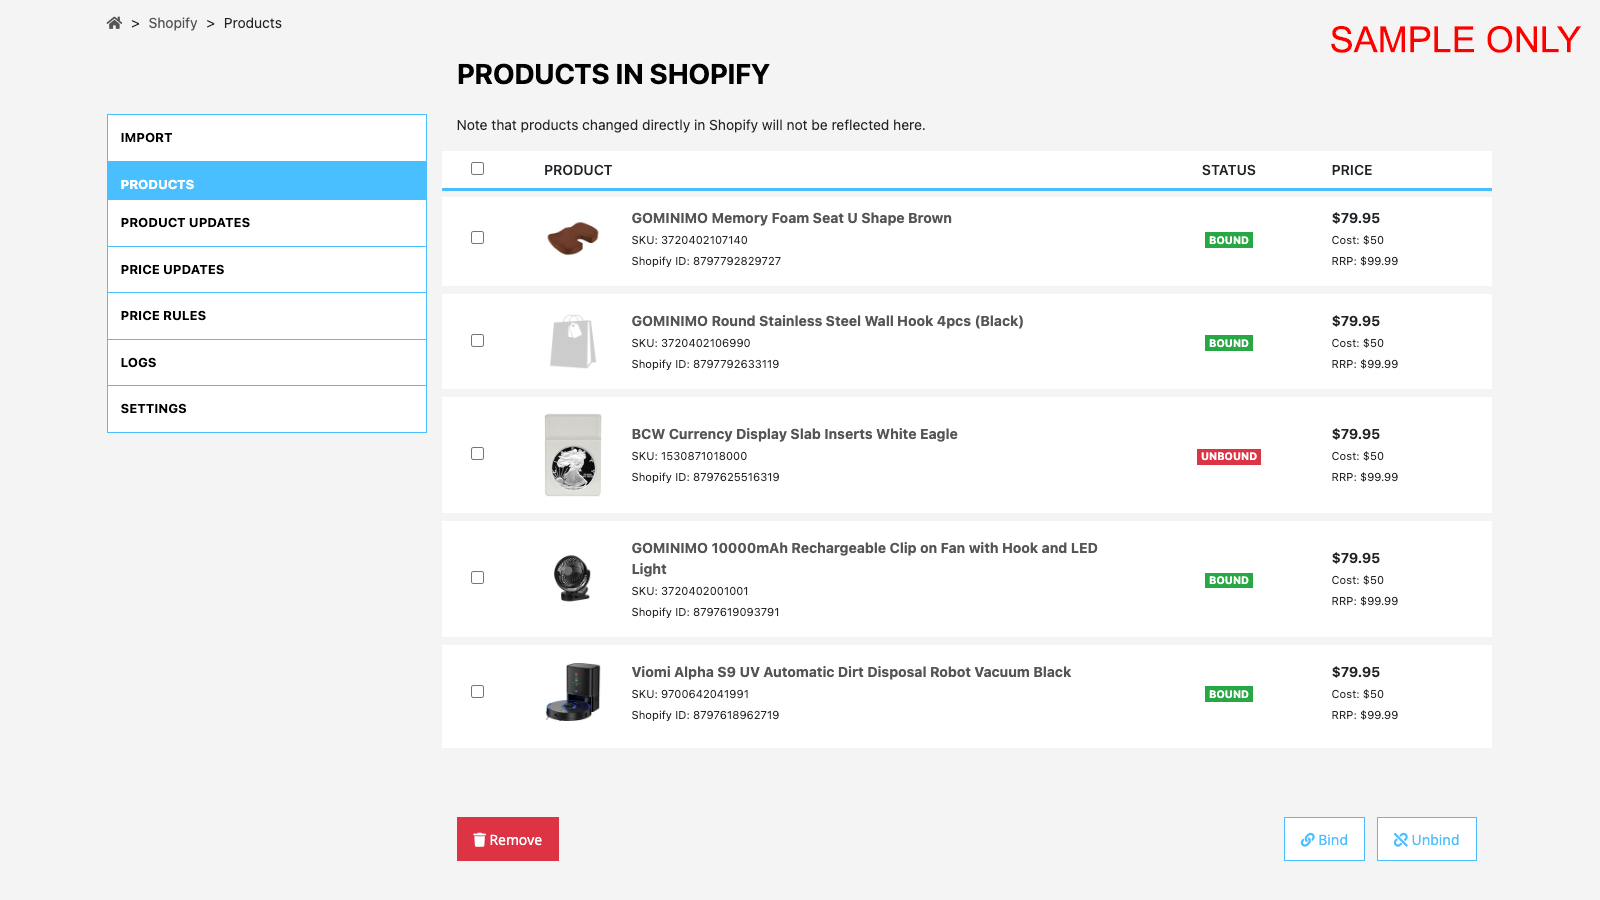 Products that have been imported into Shopify